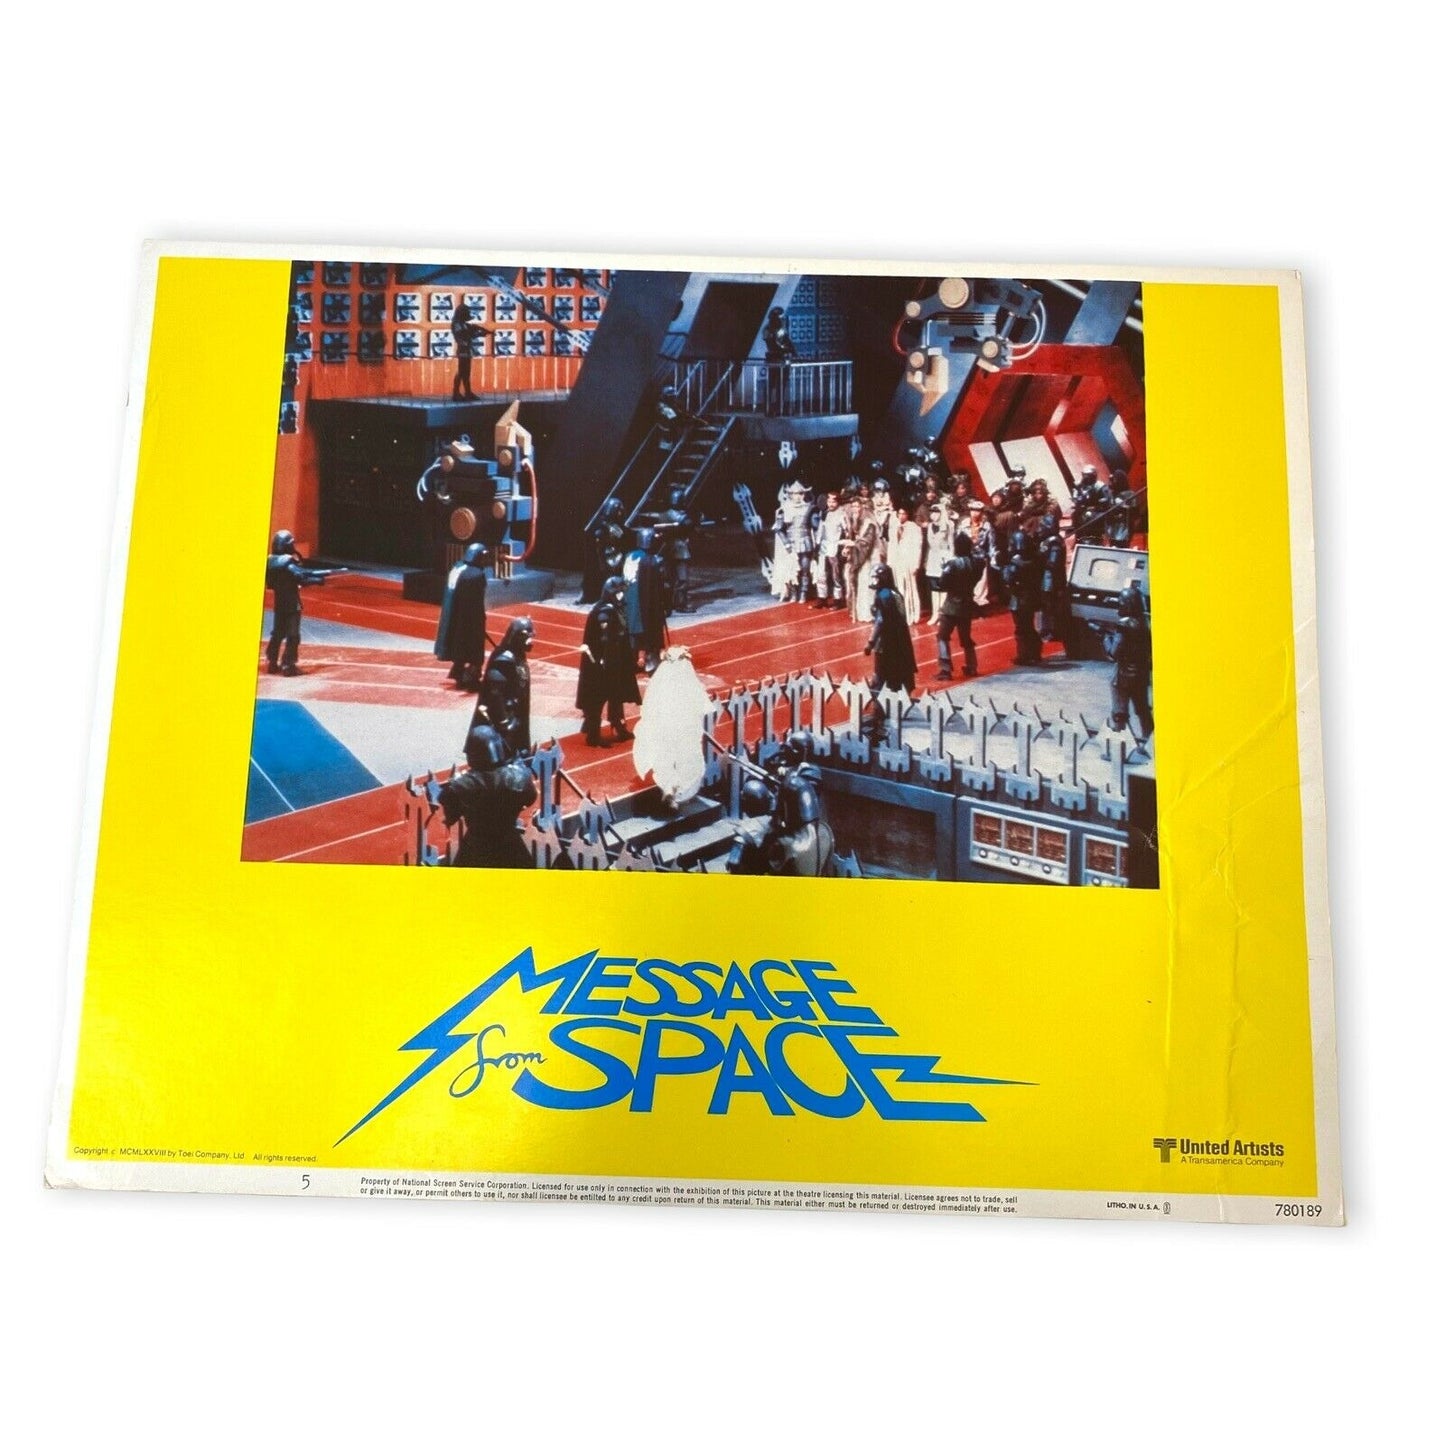 Message From Space ORIGINAL Theater Lobby Card 5 Sci Fi Movie Poster 1978